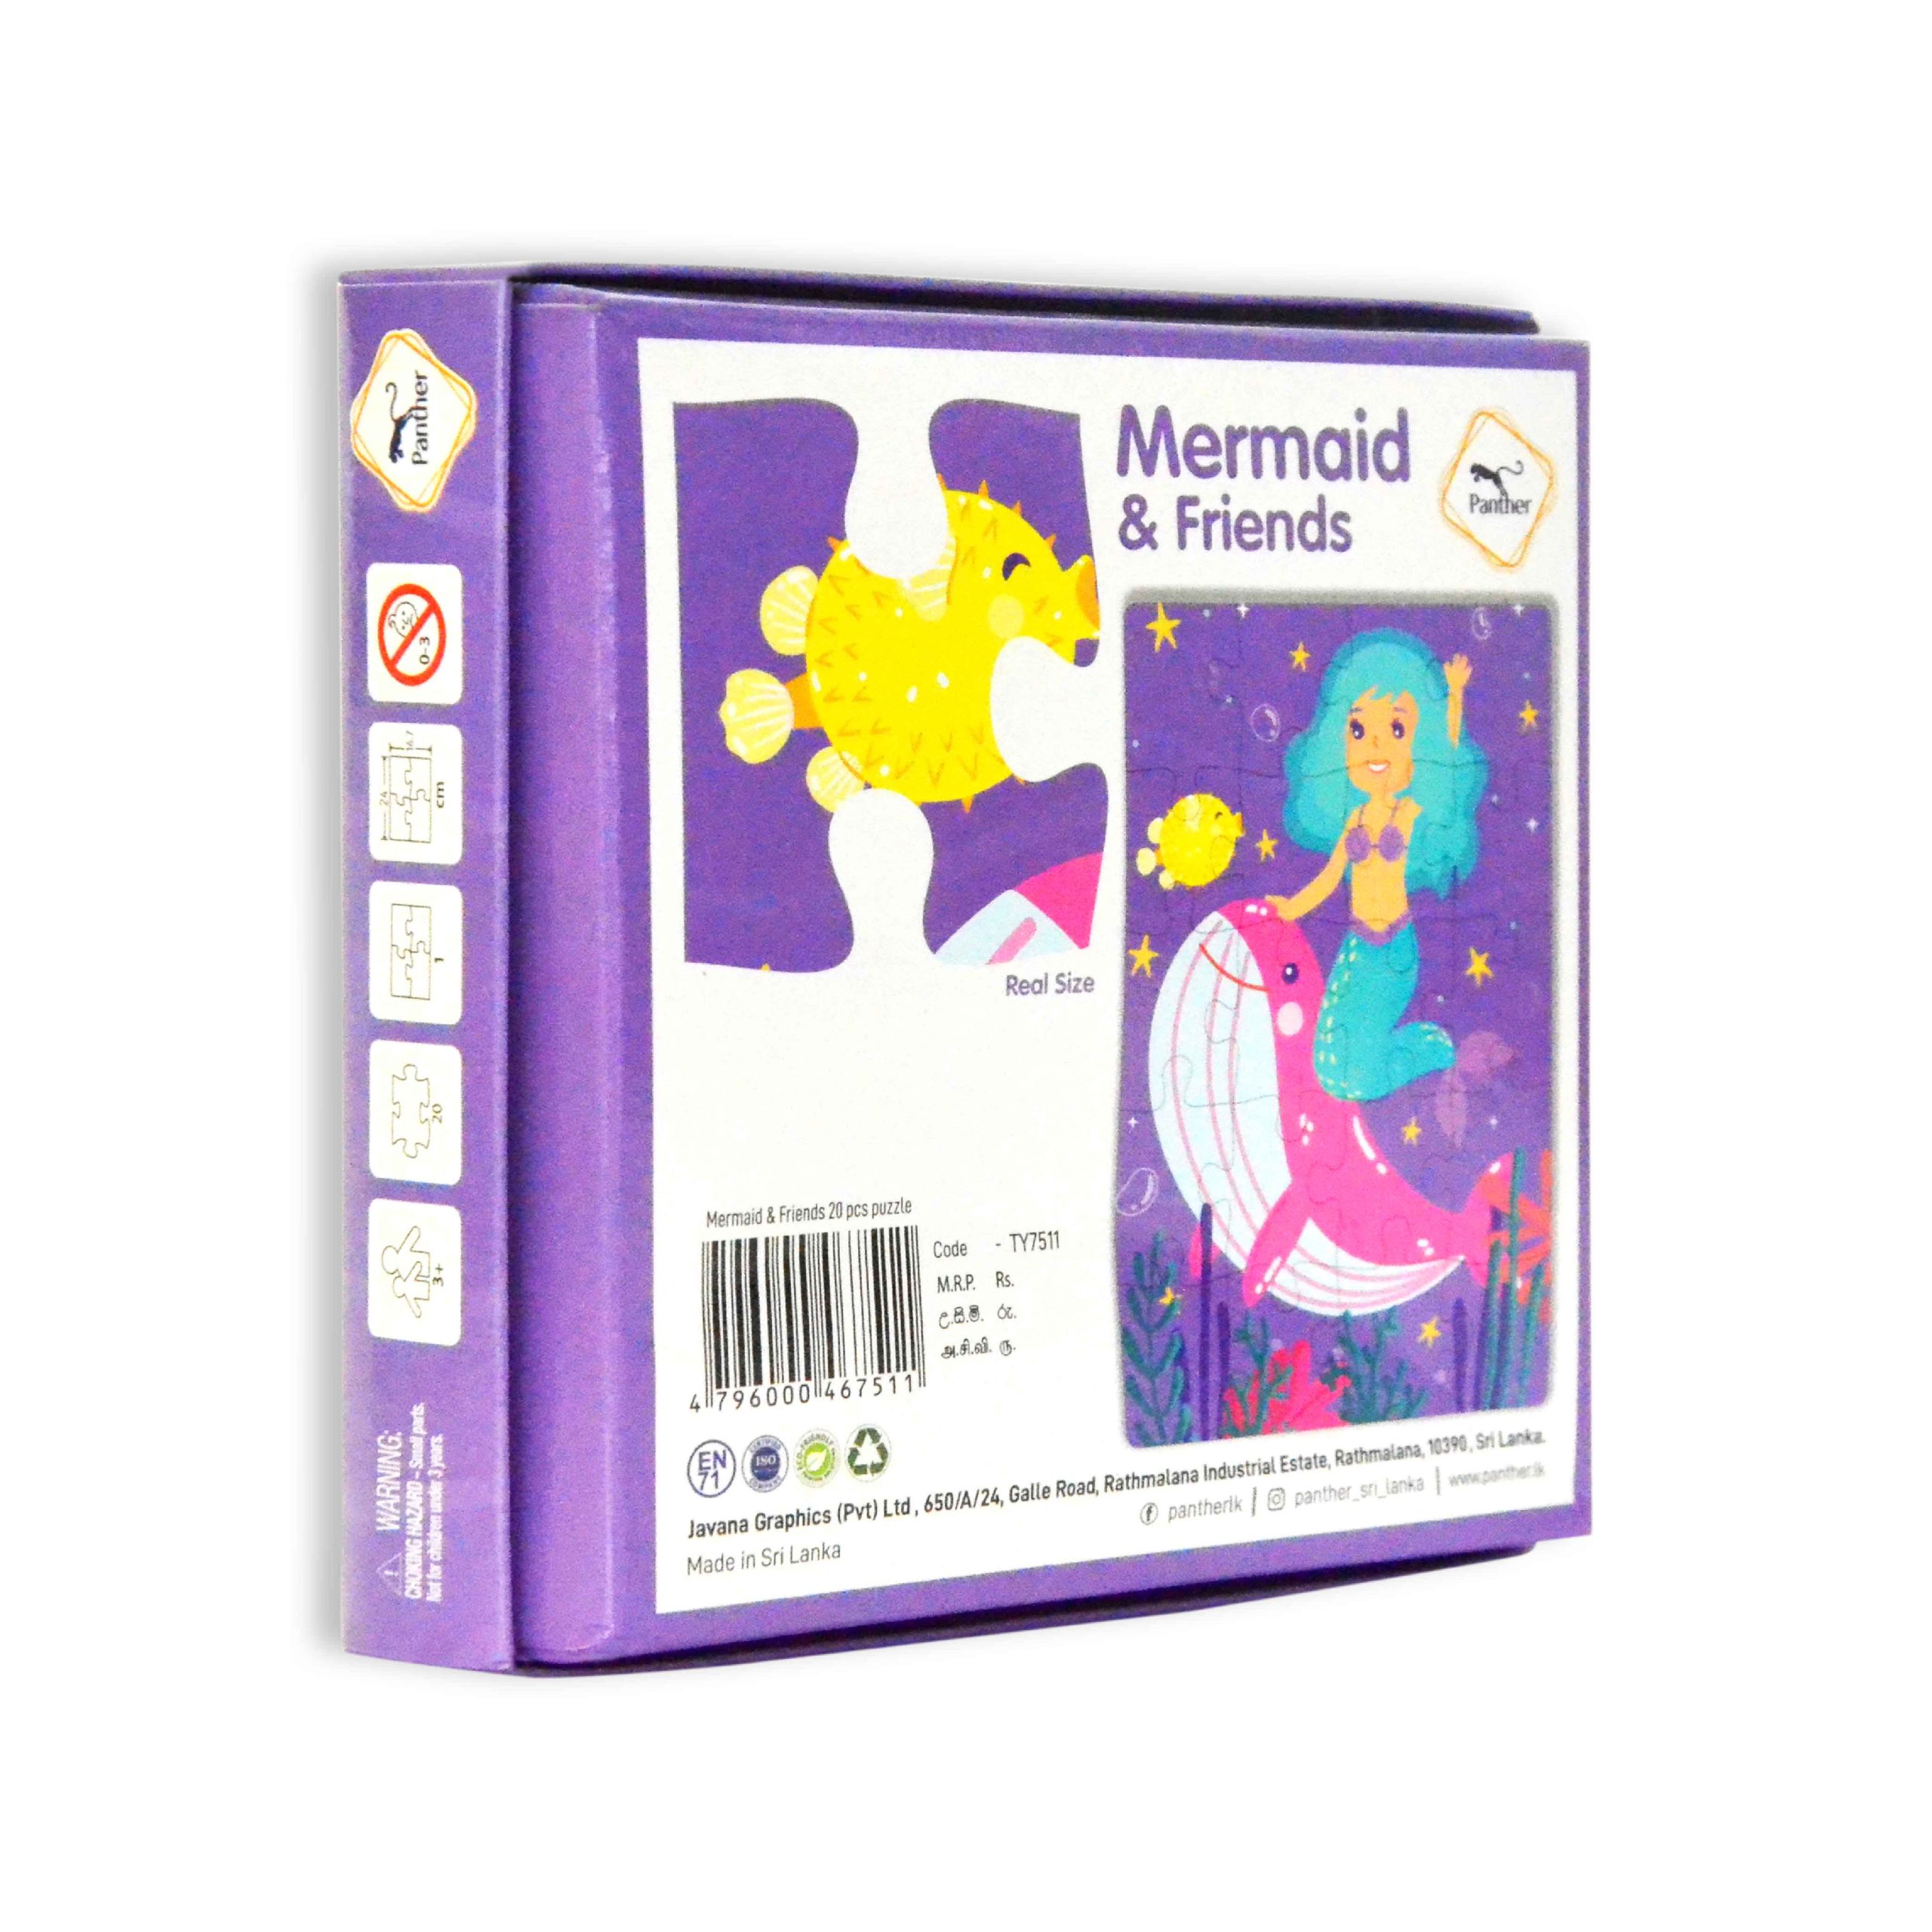 TY7511 Mermaid Friends 20 pcs puzzle 03 scaled